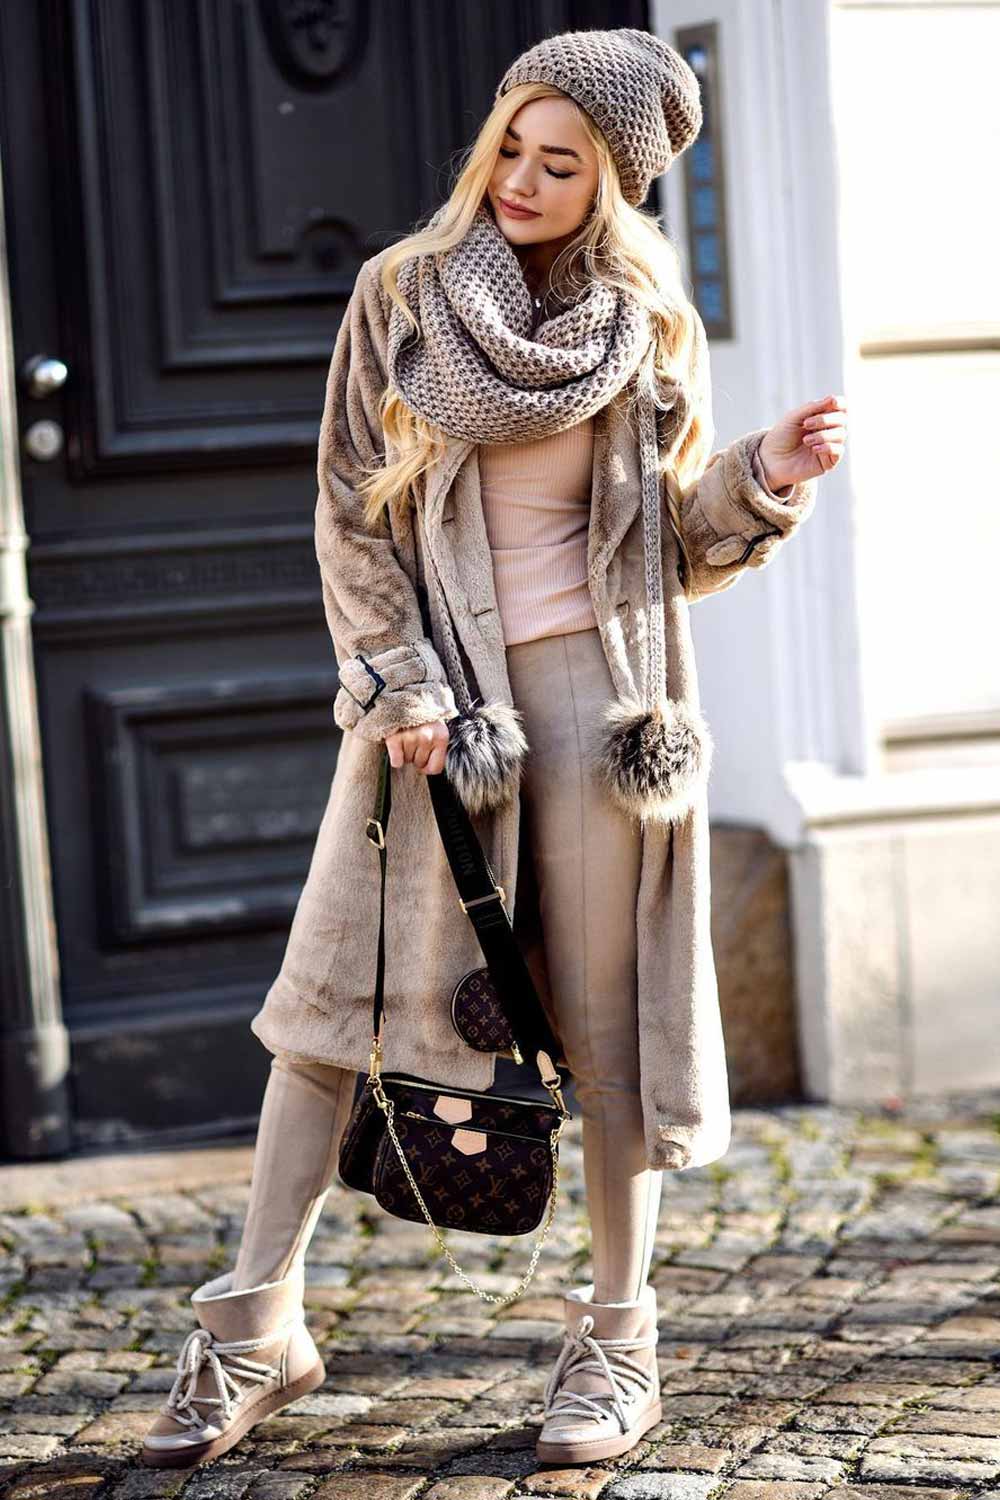 10 Stylish Winter Outfits For Women Trending This Year - The Kosha